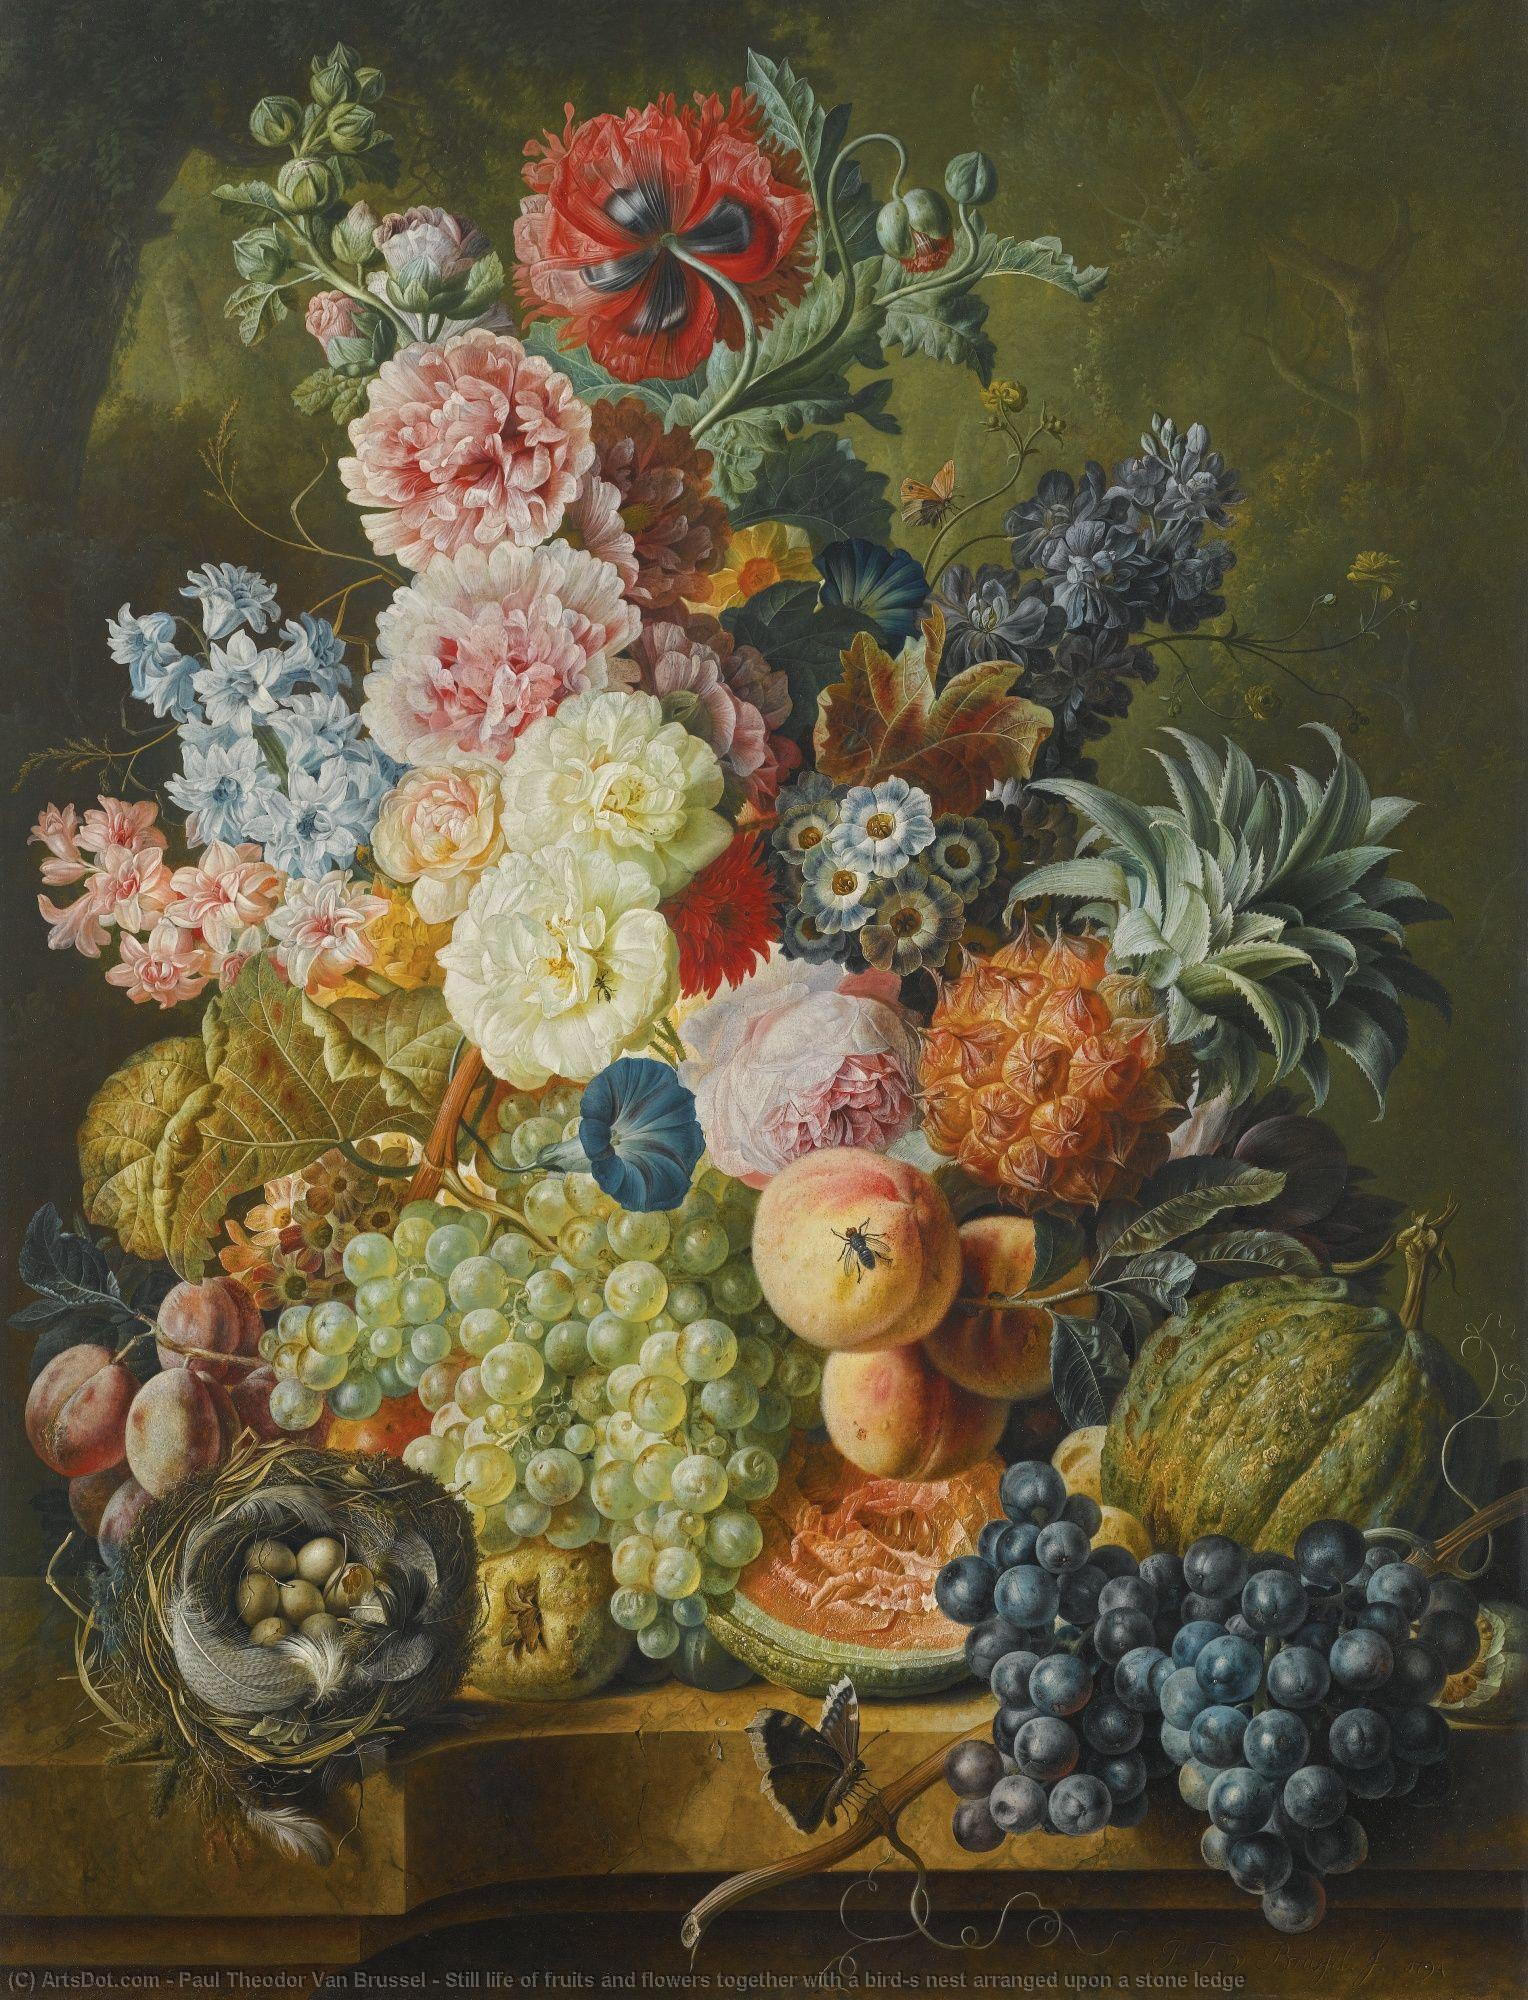 WikiOO.org - Encyclopedia of Fine Arts - Lukisan, Artwork Paul Theodor Van Brussel - Still life of fruits and flowers together with a bird's nest arranged upon a stone ledge